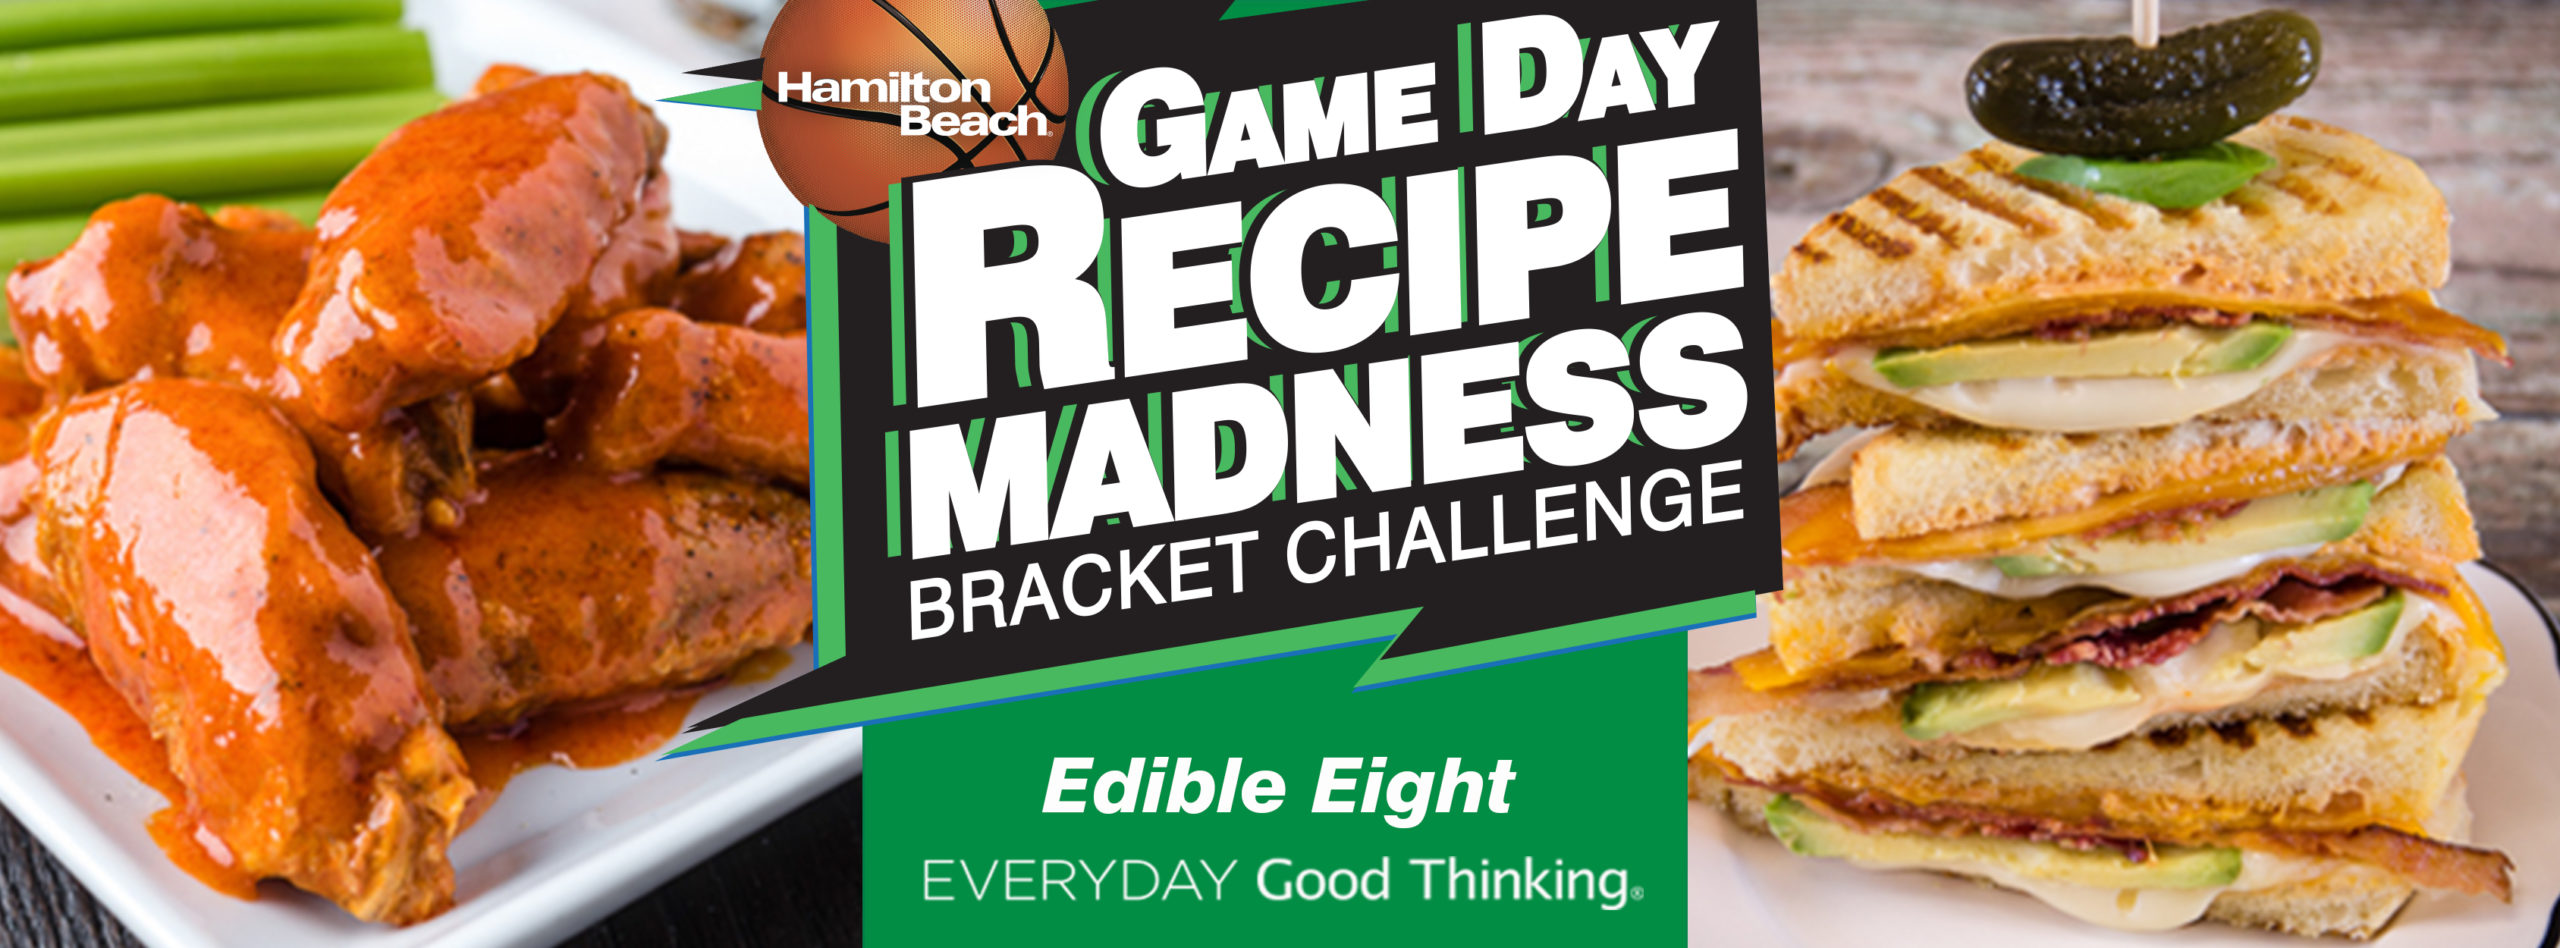 Blog for Game Day Recipe Madness Bracket Challenge: Edible Eight